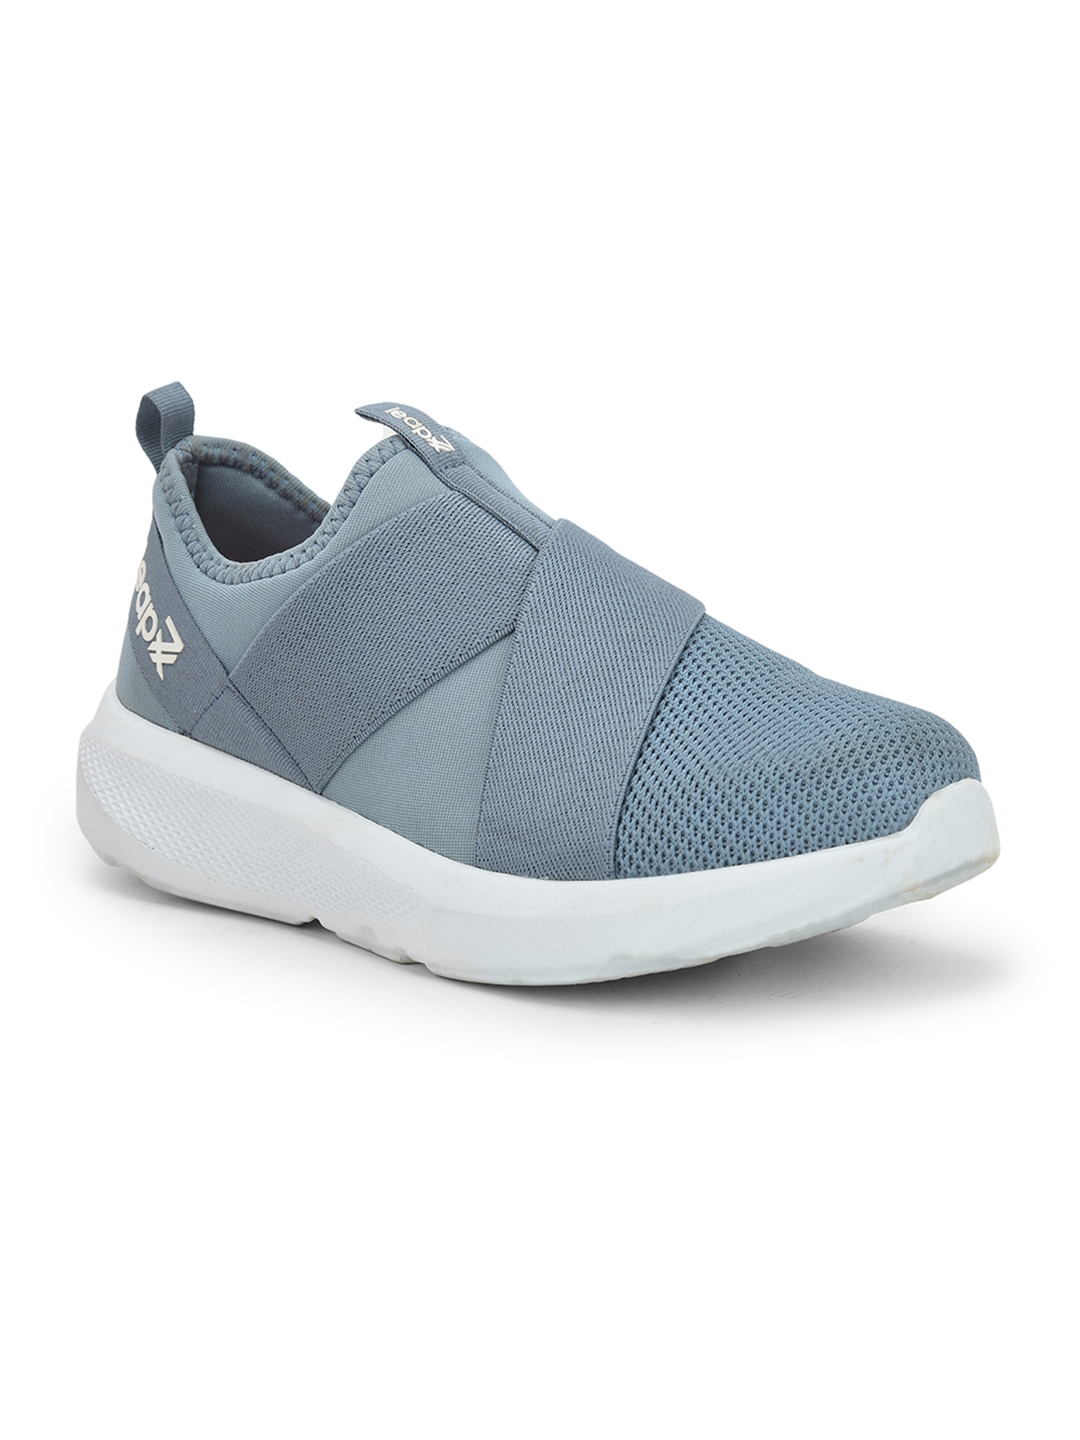 Liberty | LEAP7X by Liberty S.Blue Sports Shoes SKATERS-5 MRP 2199 For :- Women